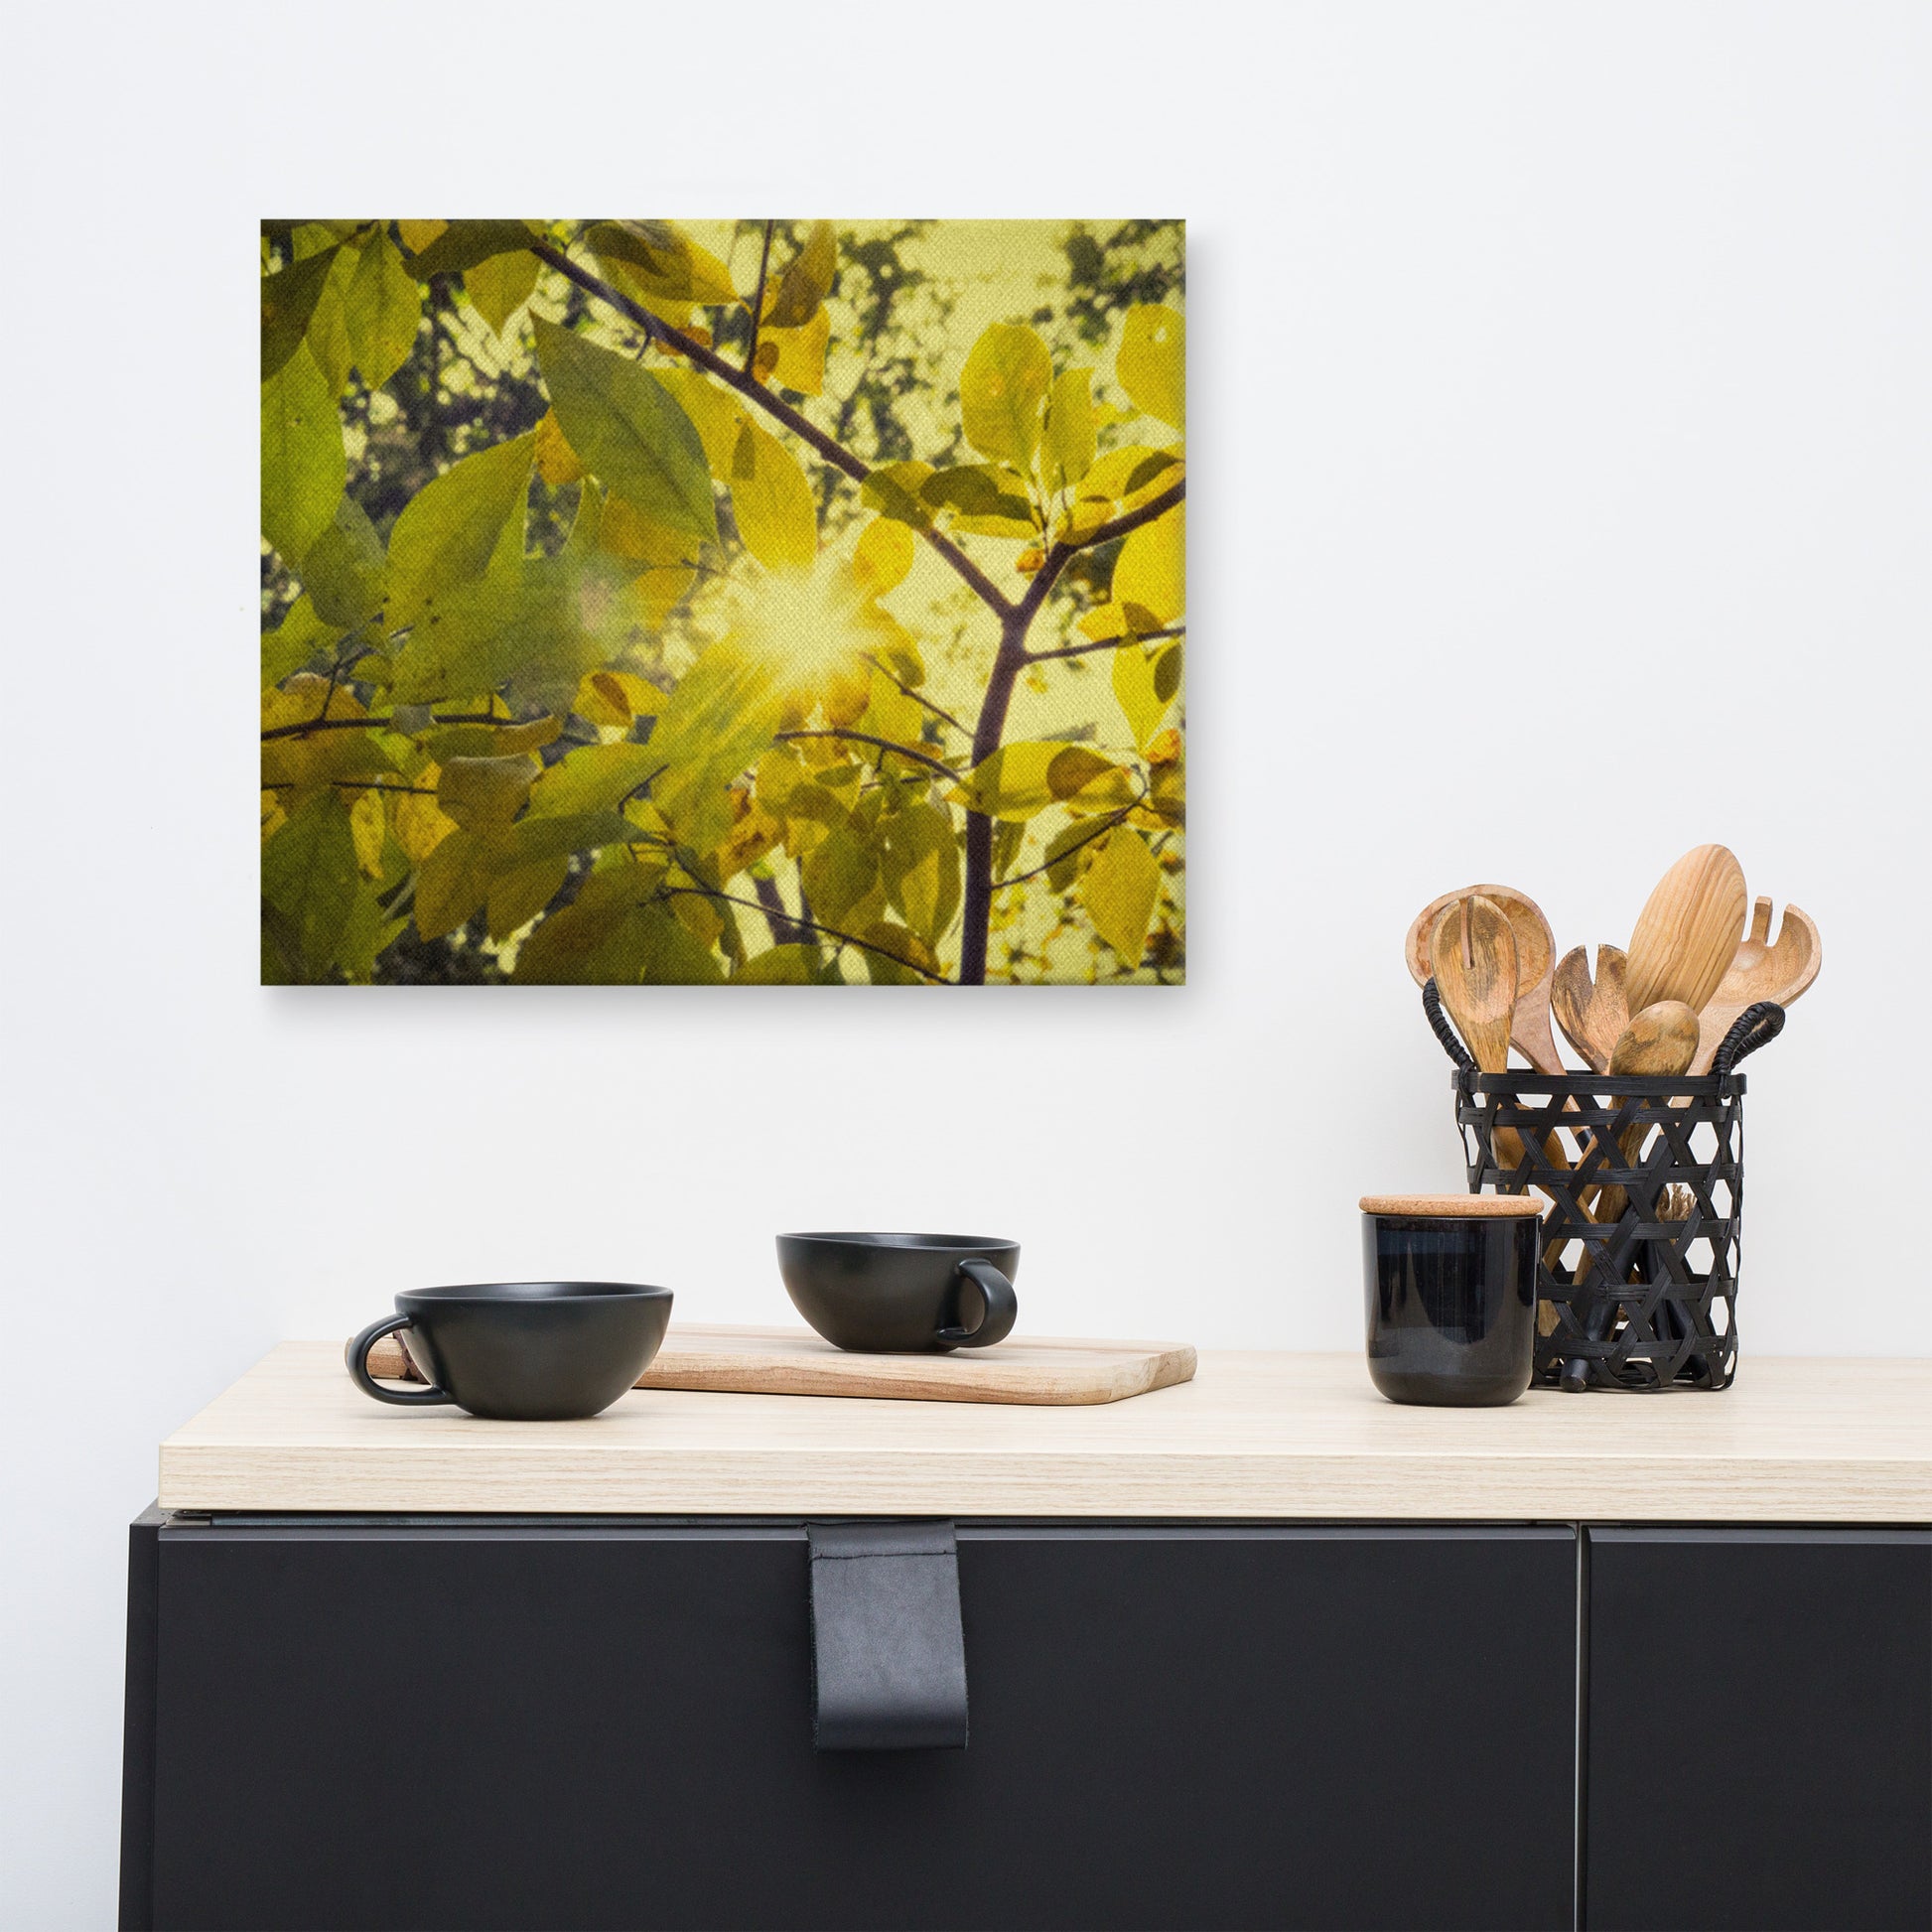 Abstract Kitchen Art: Aged Golden Leaves Abstract / Country Rustic Style / Botanical / Plants Nature Photograph Canvas Wall Art Print - Artwork